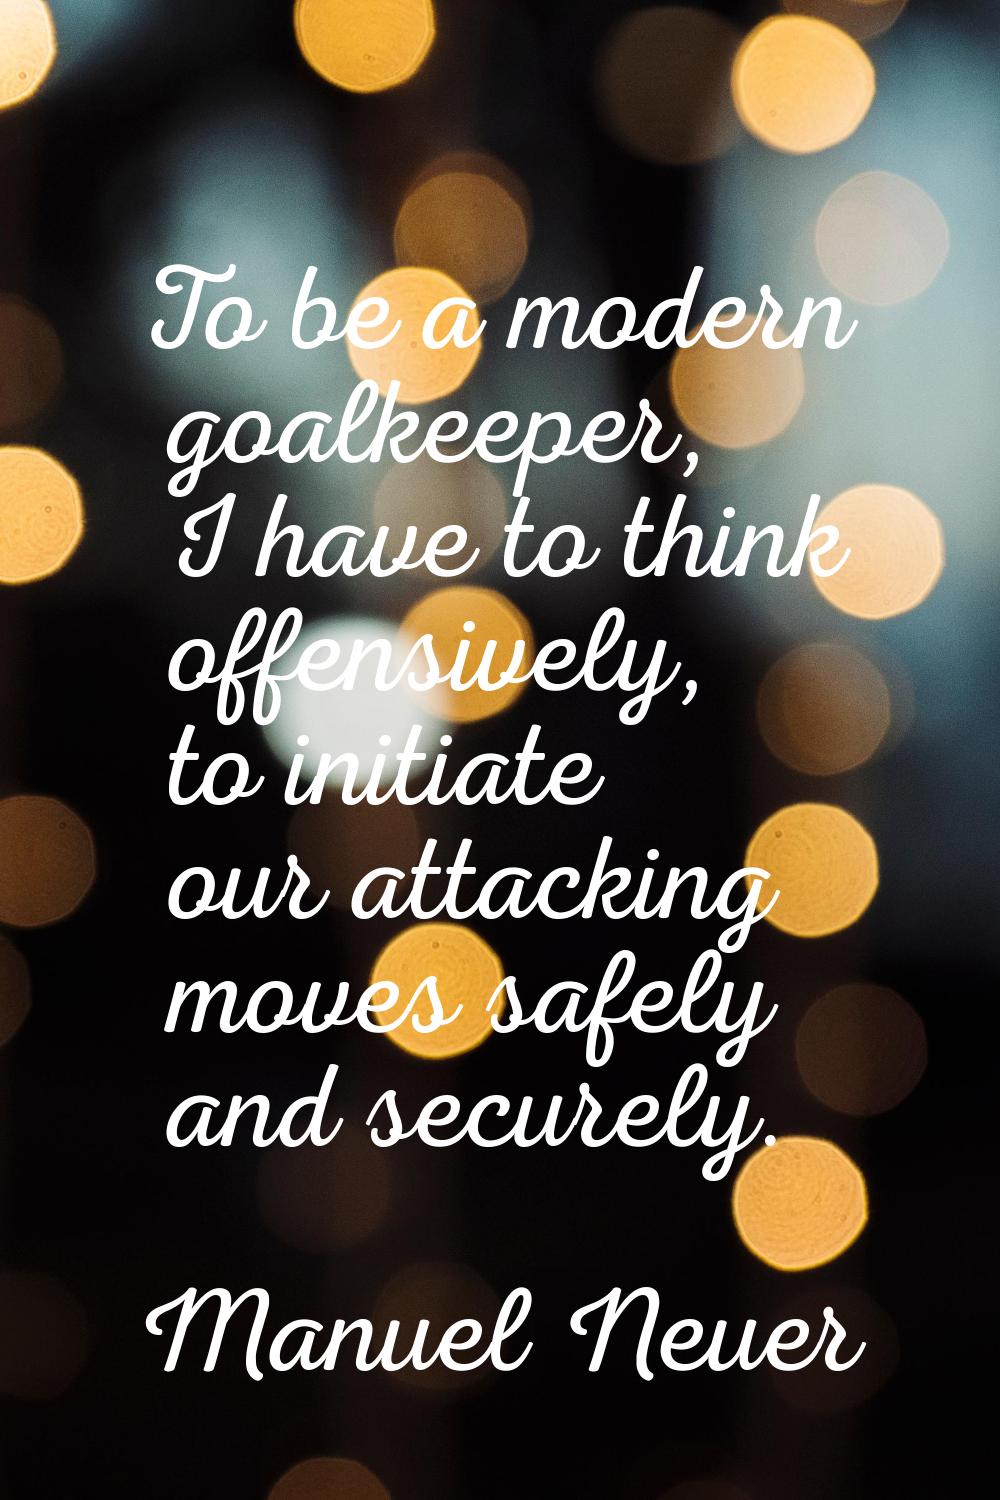 To be a modern goalkeeper, I have to think offensively, to initiate our attacking moves safely and 